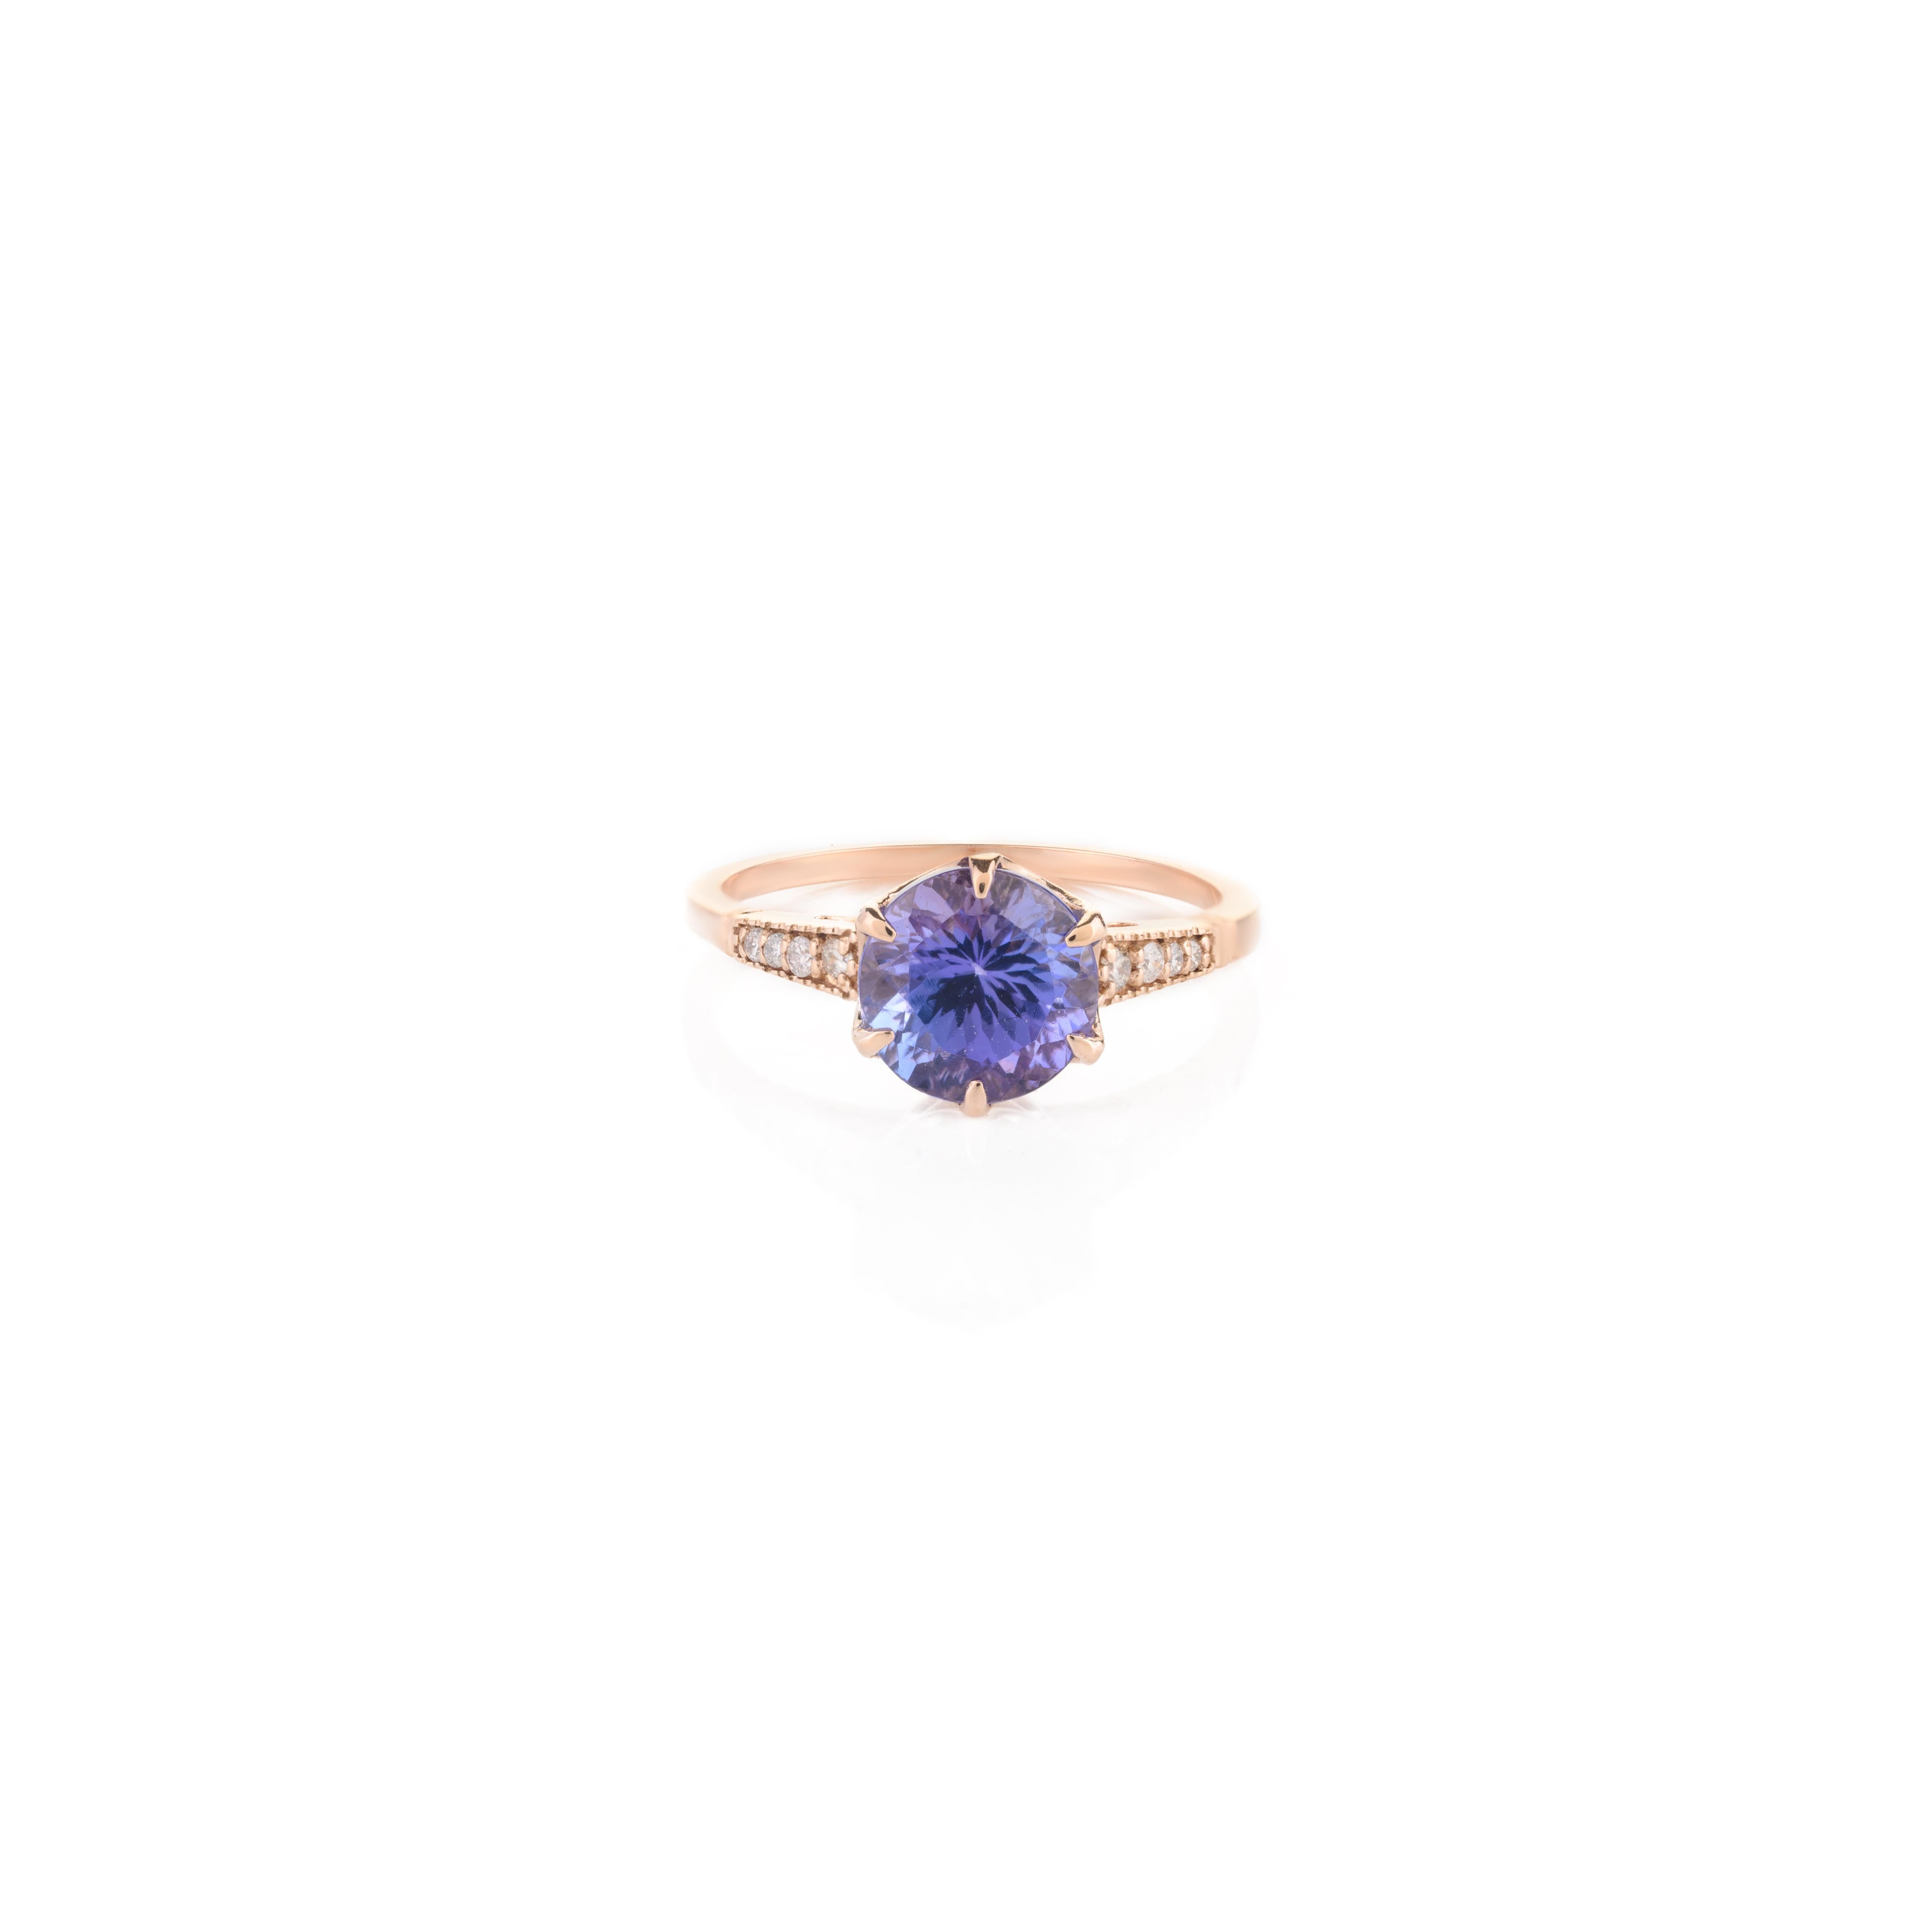 For Sale:  Genuine 1.68 Cts Tanzanite and Diamond Engagement Ring in 18k Solid Rose Gold 5